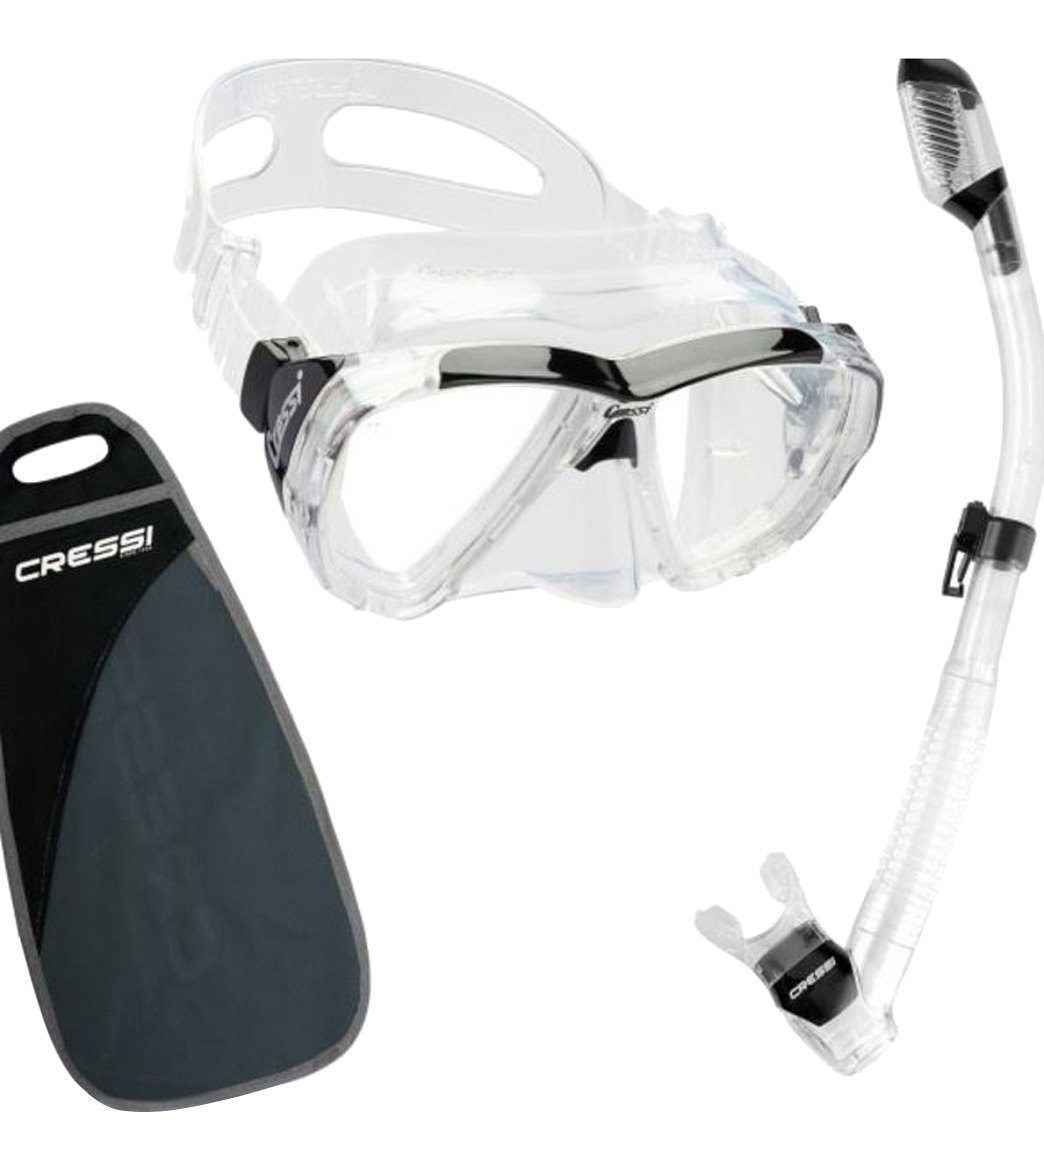 Cressi Scuba Big Eyes Mask & Dry Snorkel Set - Clear Rubber/Silicone - Swimoutlet.com